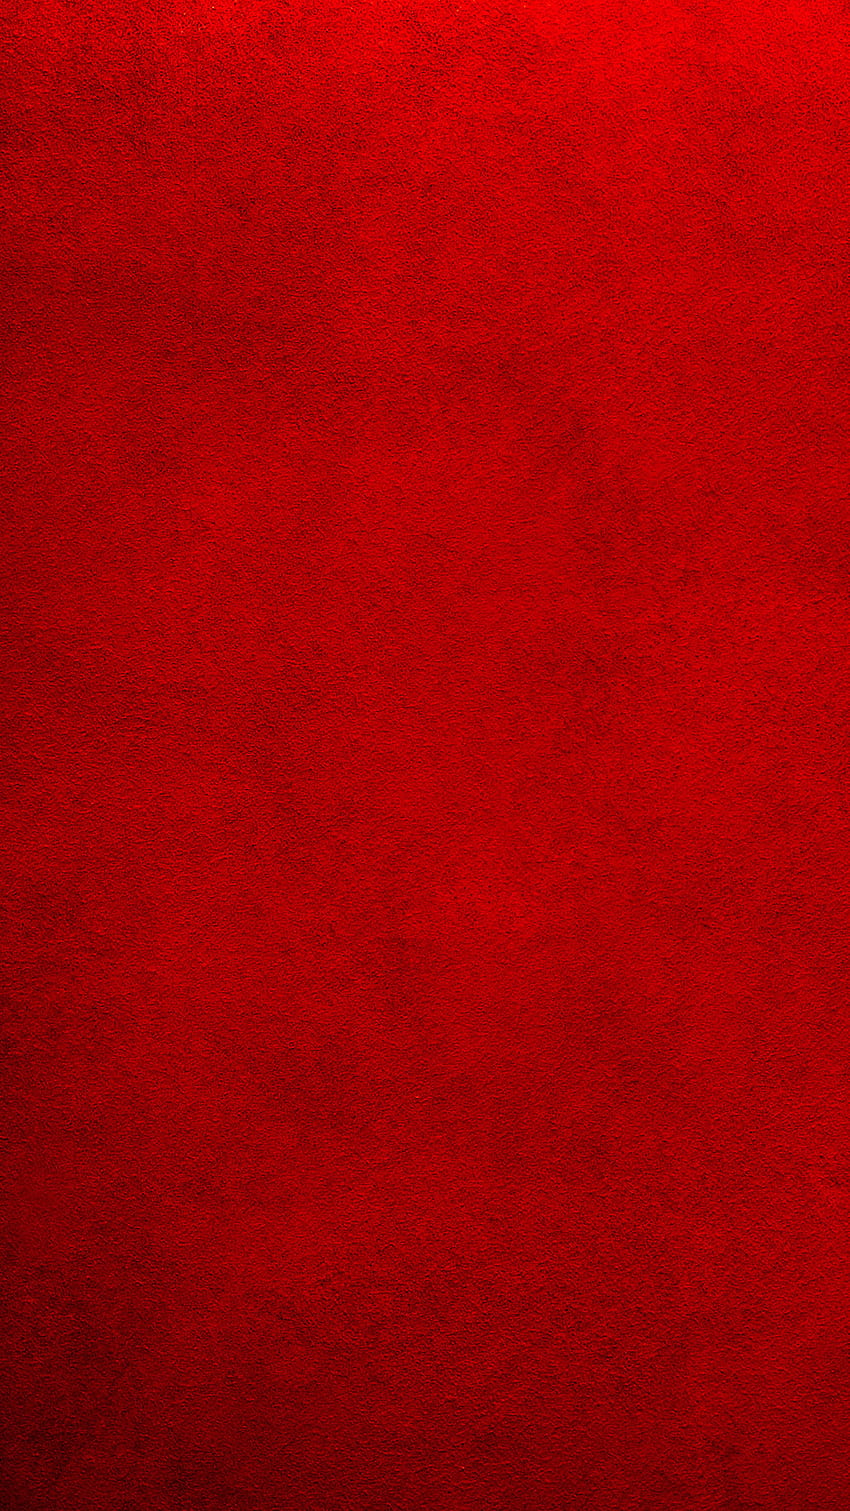 Abstract Colors in the Shades of Red 4K wallpaper download